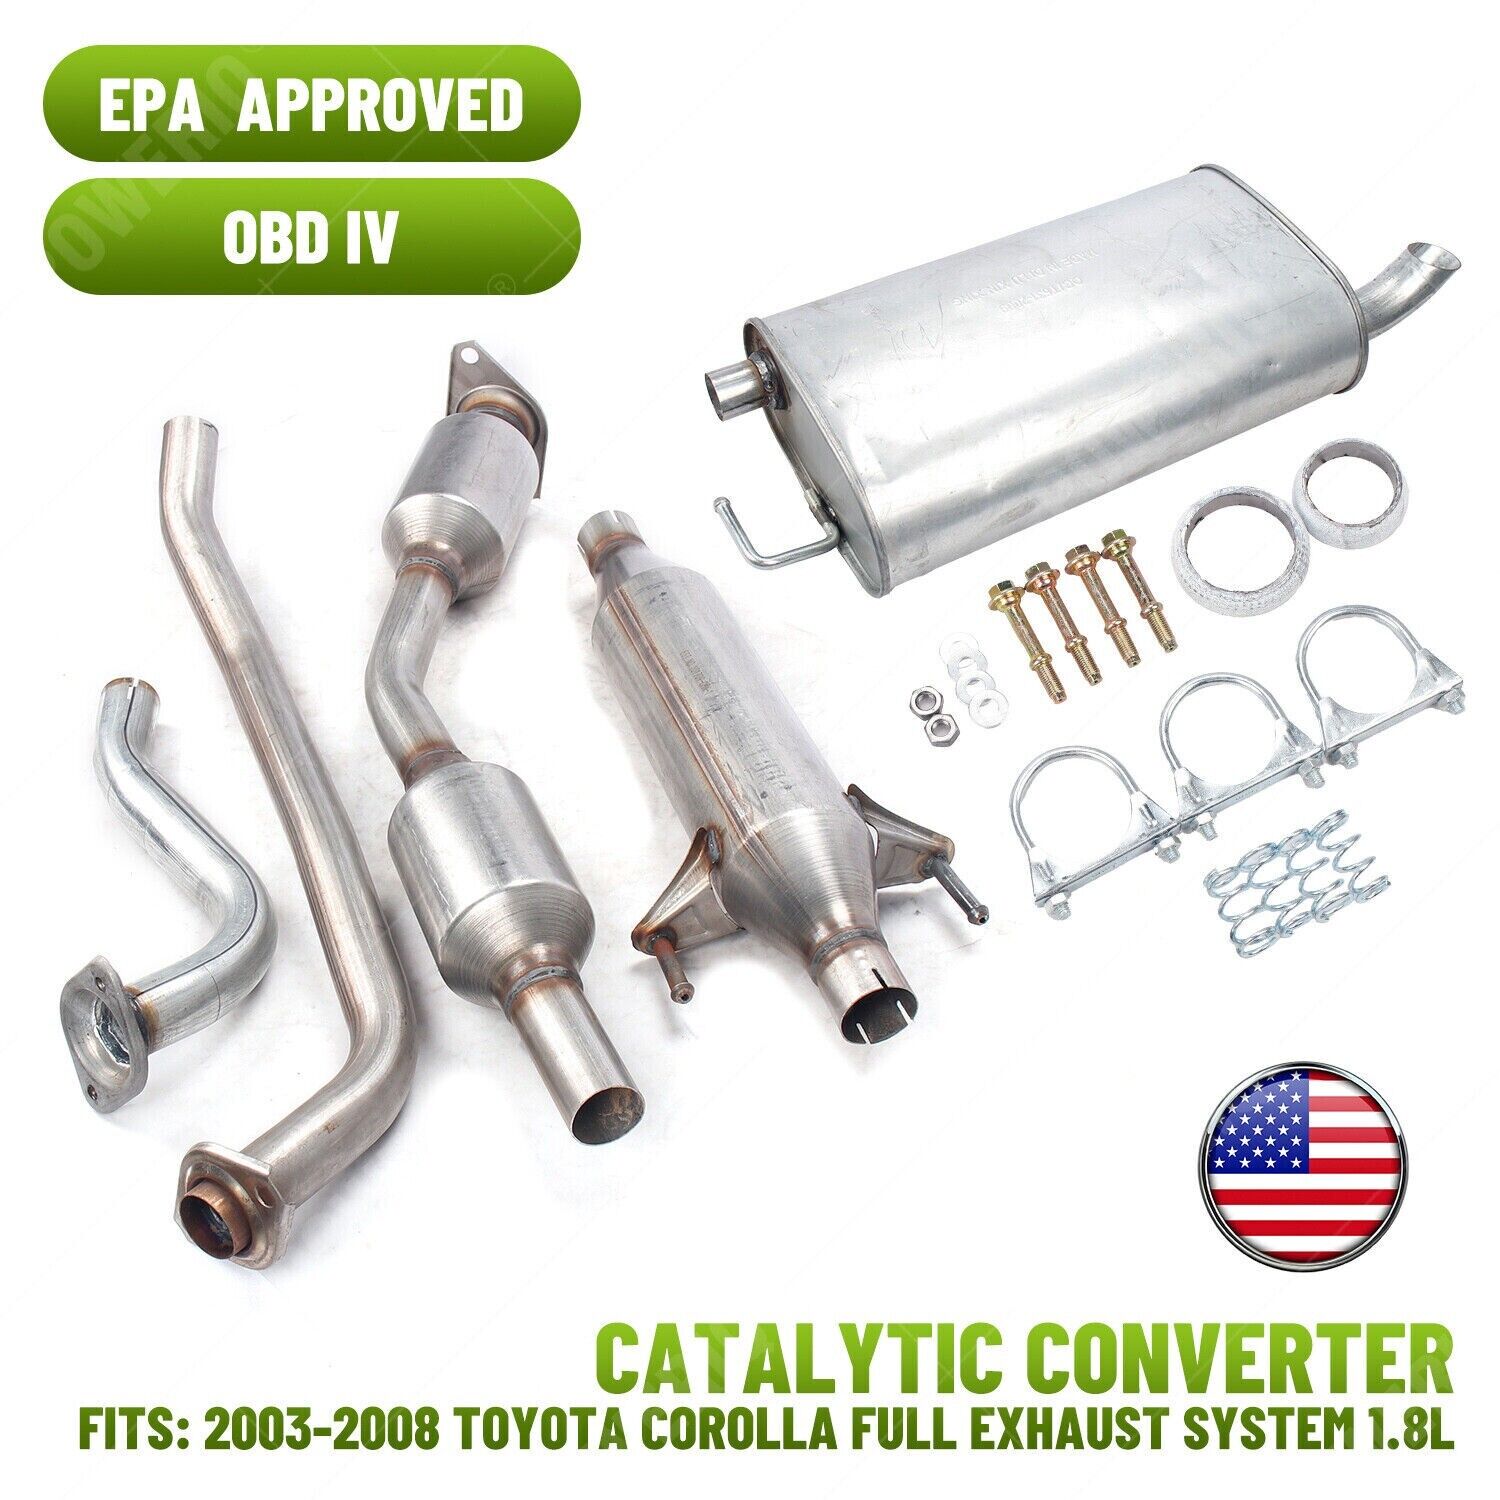 FULL EXHAUST SYSTEM FITS: 2003 - 2008 TOYOTA COROLLA 1.8L EPA  APPROVE